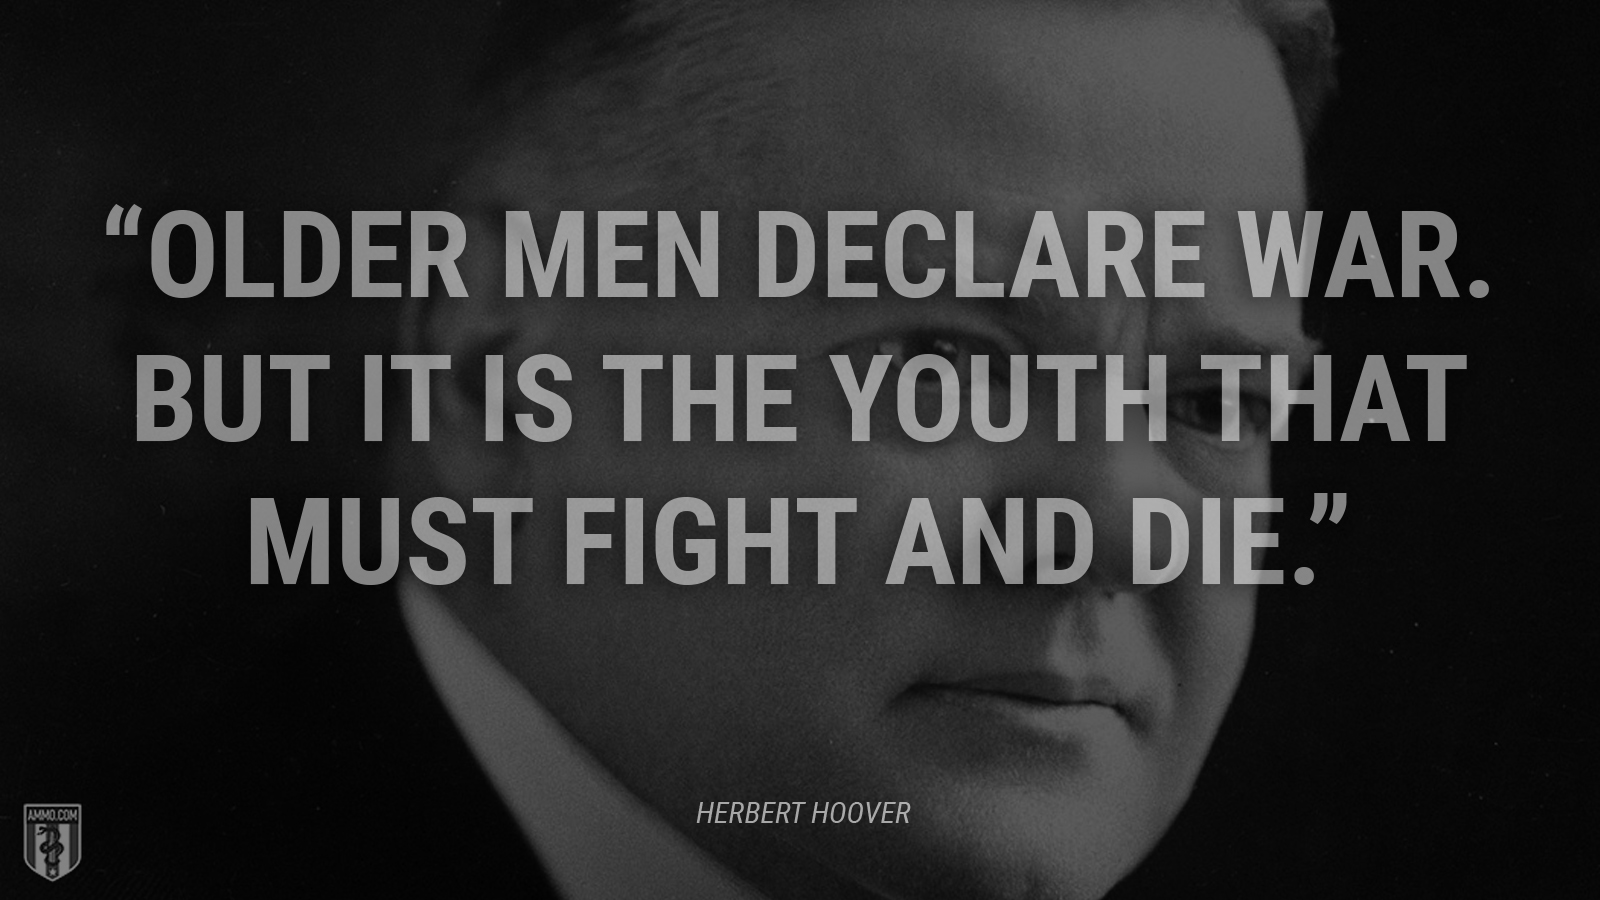 “Older men declare war. But it is the youth that must fight and die.” - Herbert Hoover